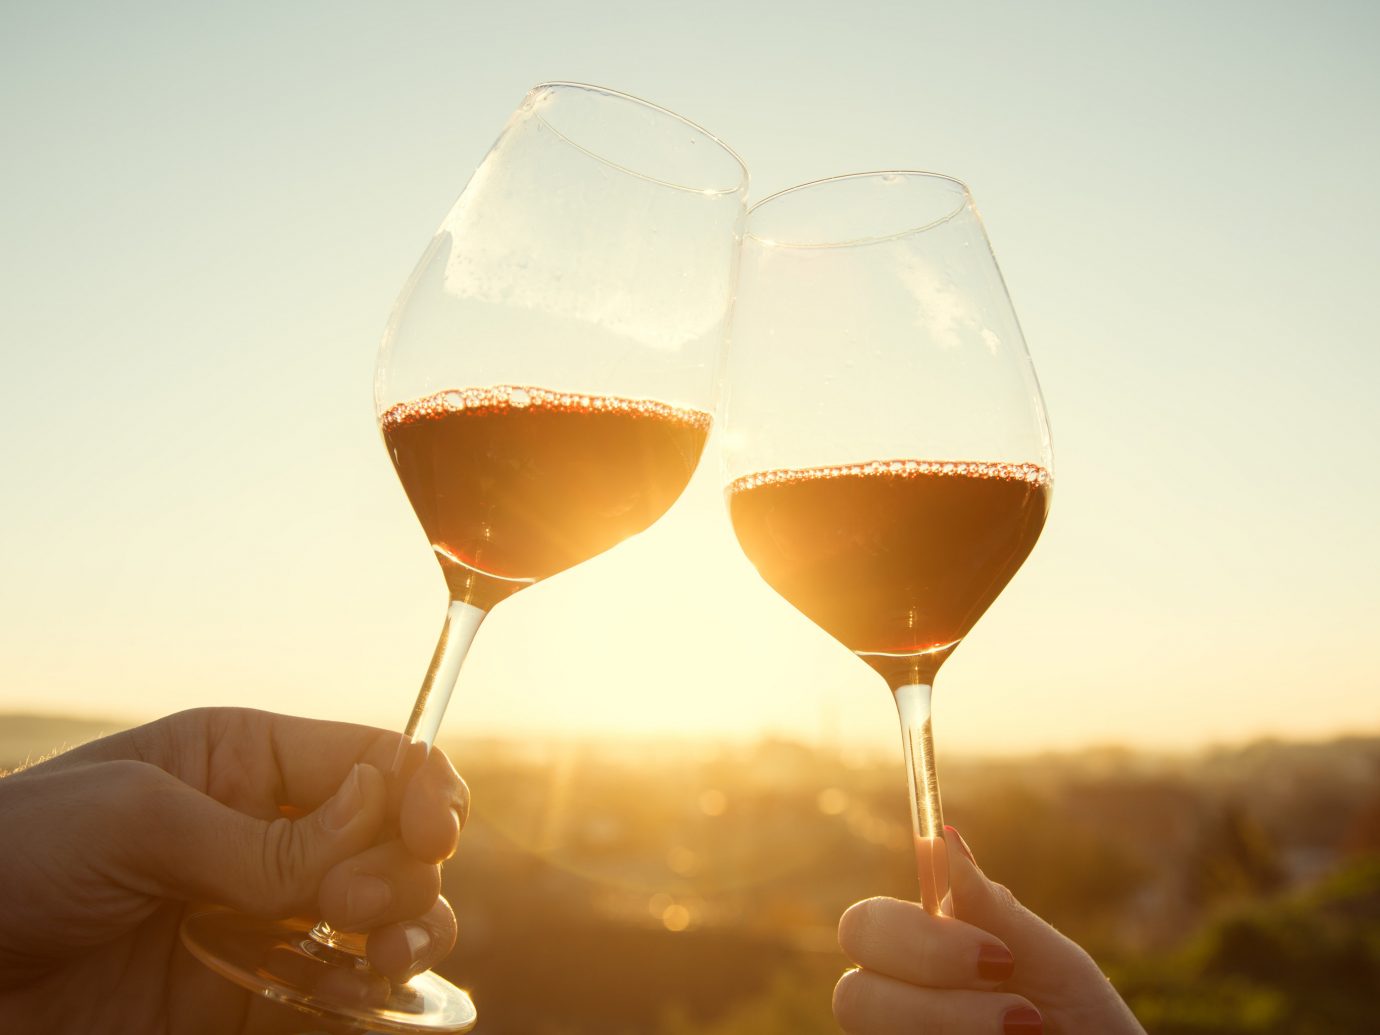 Food + Drink Girls Getaways Travel Tips Trip Ideas Weekend Getaways wine sky person alcoholic beverage Drink wine glass stemware glass alcohol red wine close up morning reflection distilled beverage liqueur sense food container drinkware champagne white wine beverage